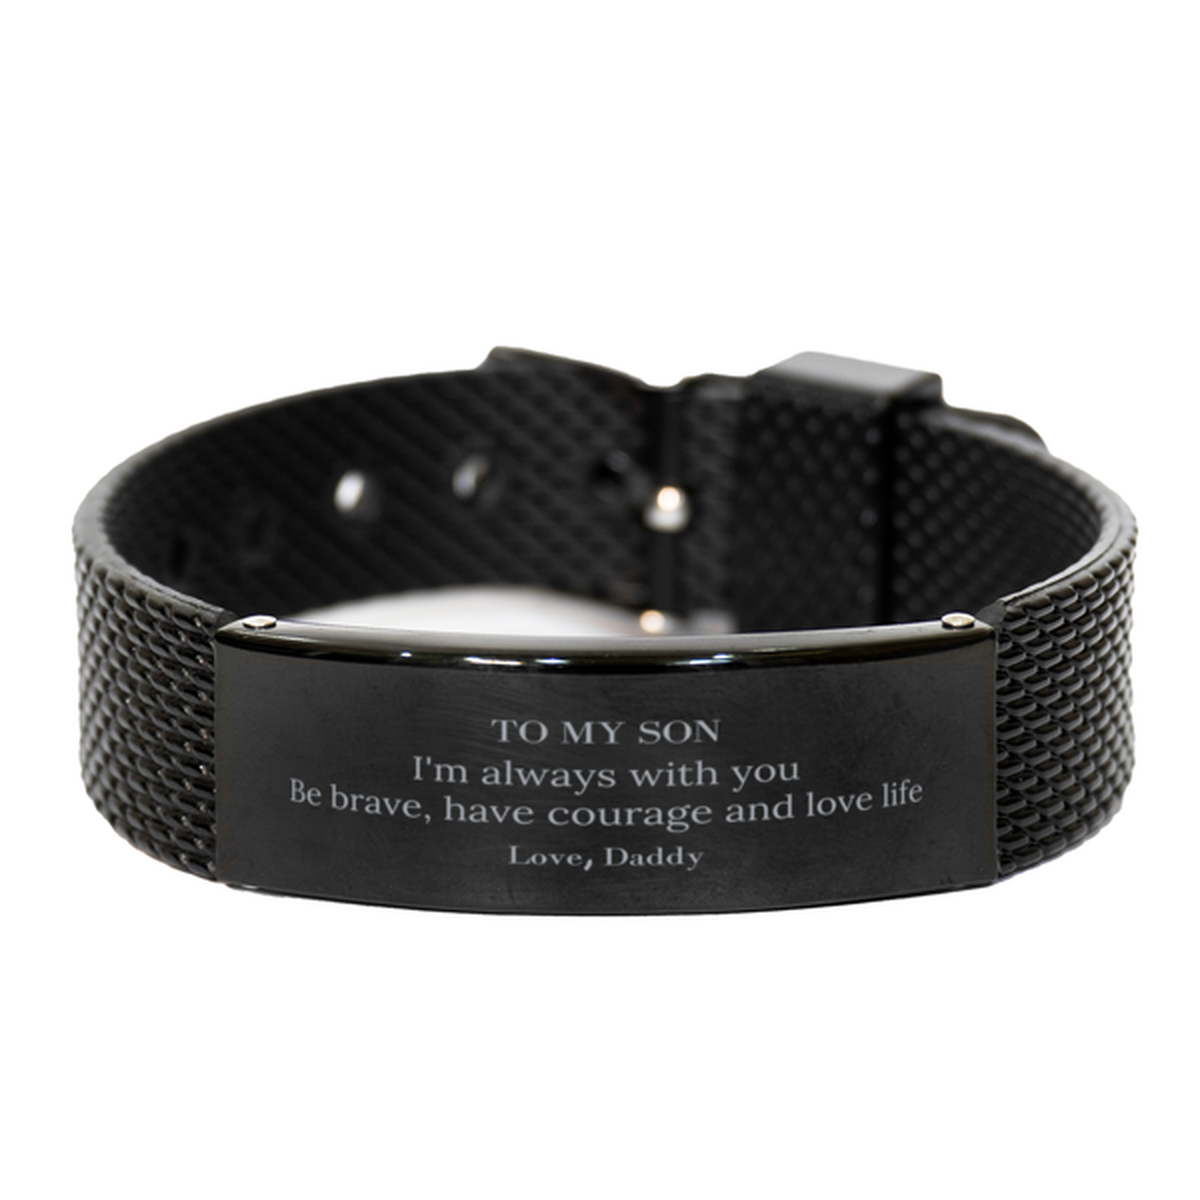 To My Son Gifts from Daddy, Unique Black Shark Mesh Bracelet Inspirational Christmas Birthday Graduation Gifts for Son I'm always with you. Be brave, have courage and love life. Love, Daddy